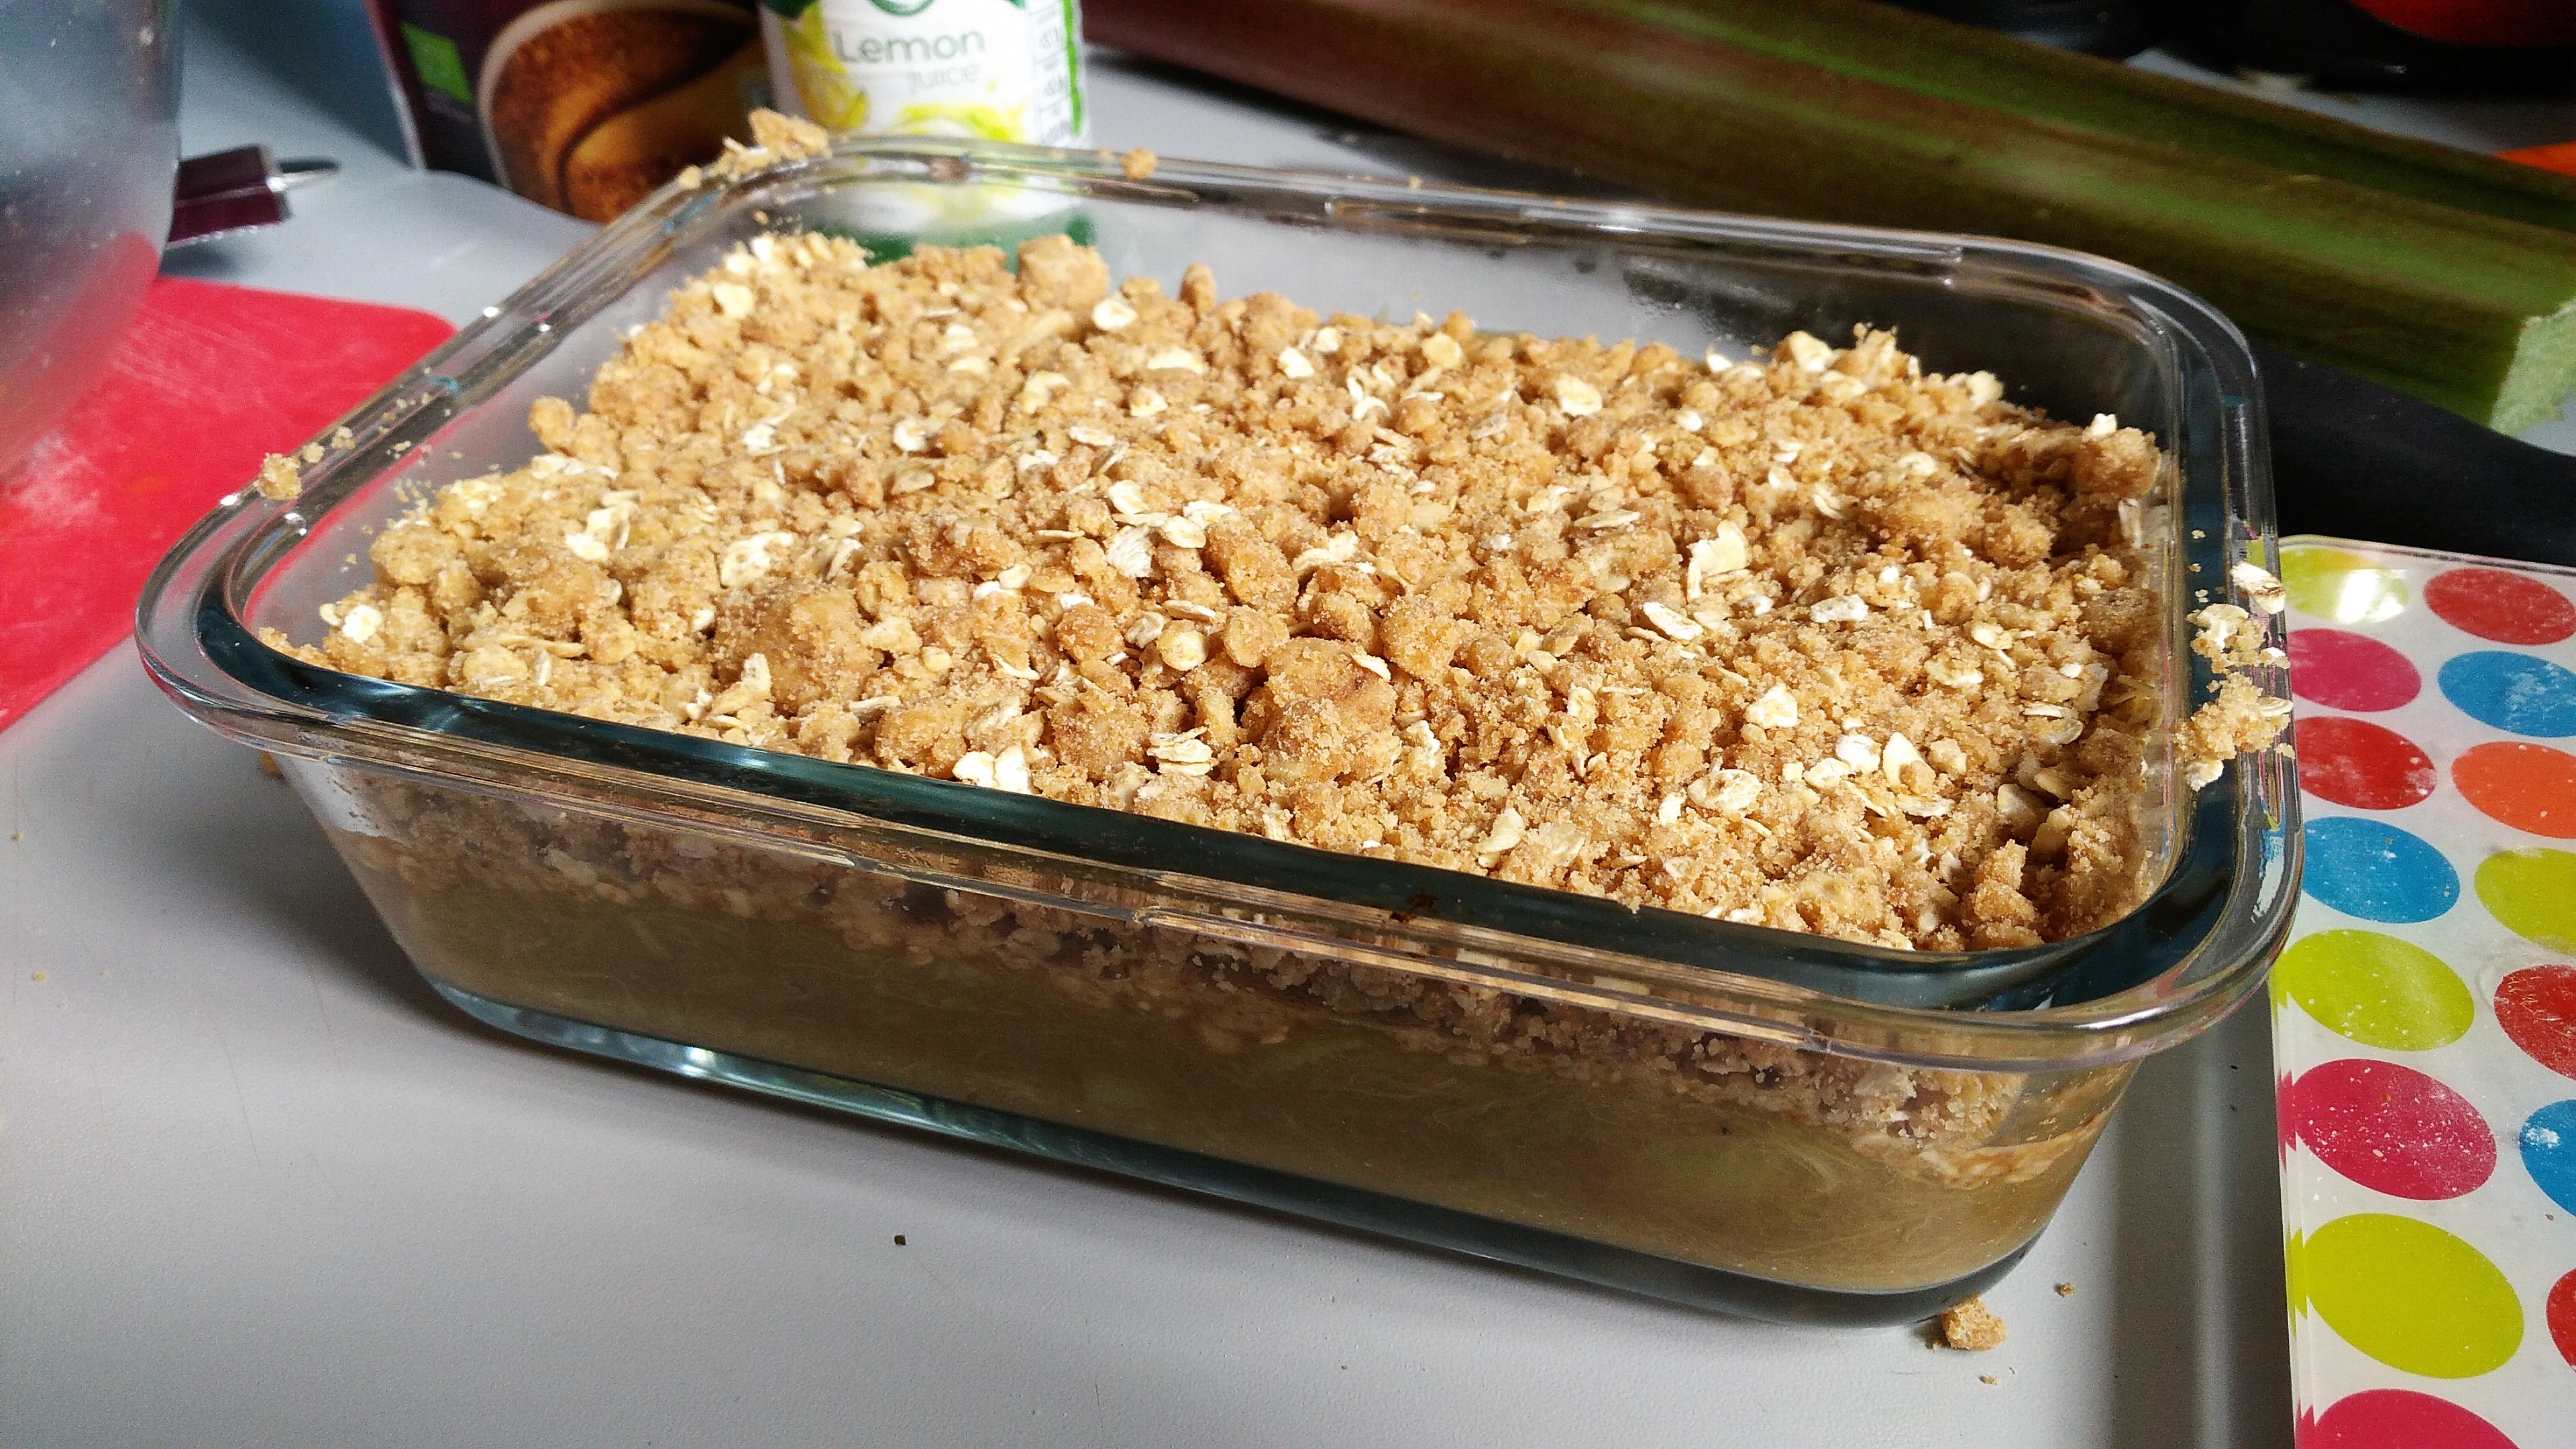 gluten free vegan rhubarb and ginger crumble ready for the oven